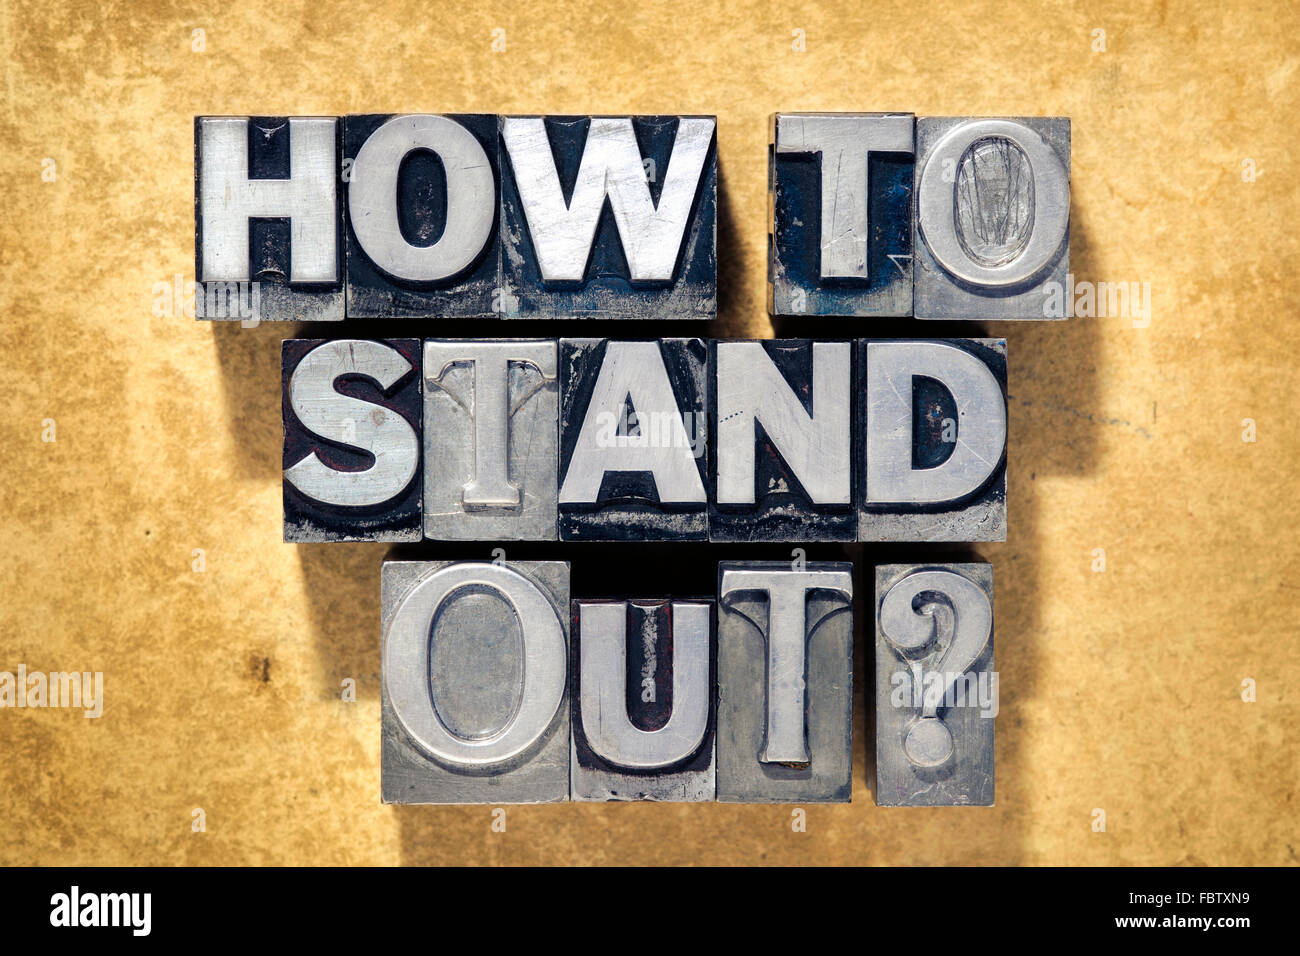 how to stand out question made from metallic letterpress type on grunge cardboard background Stock Photo